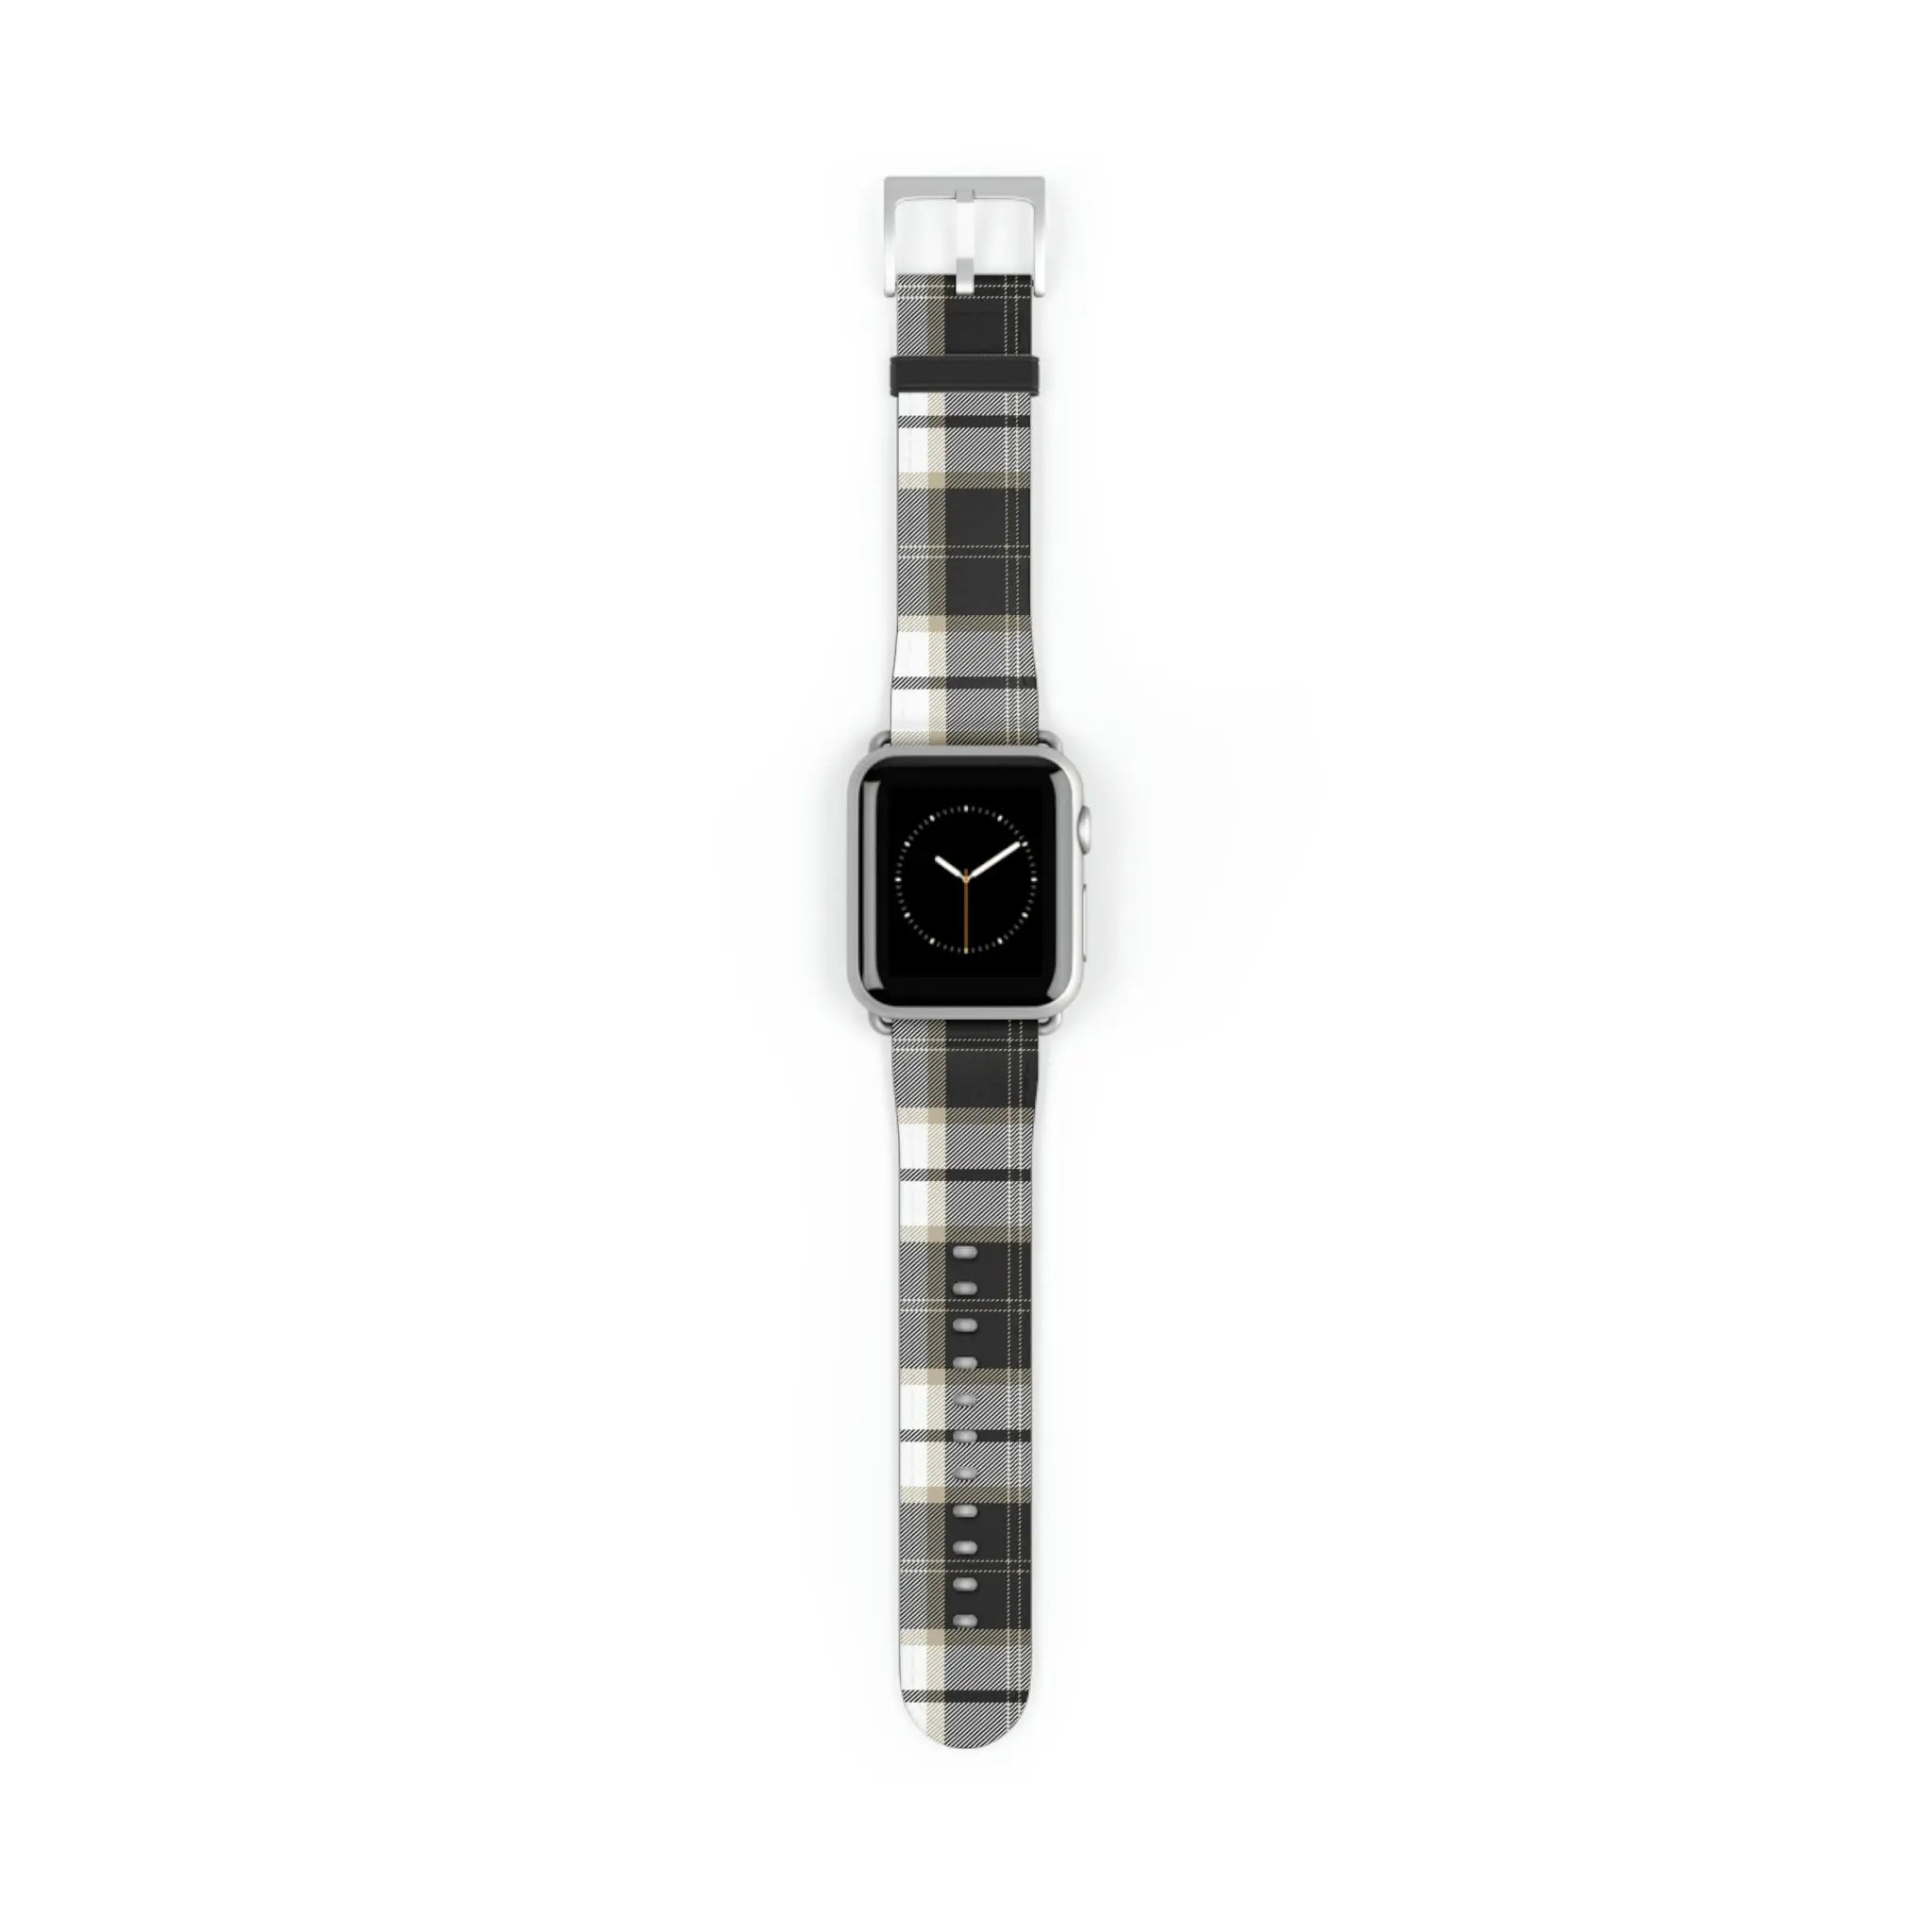  Designer Collection in Plaid (Grey Mix) Apple Watch Band Watch Band38-41mmSilverMatte